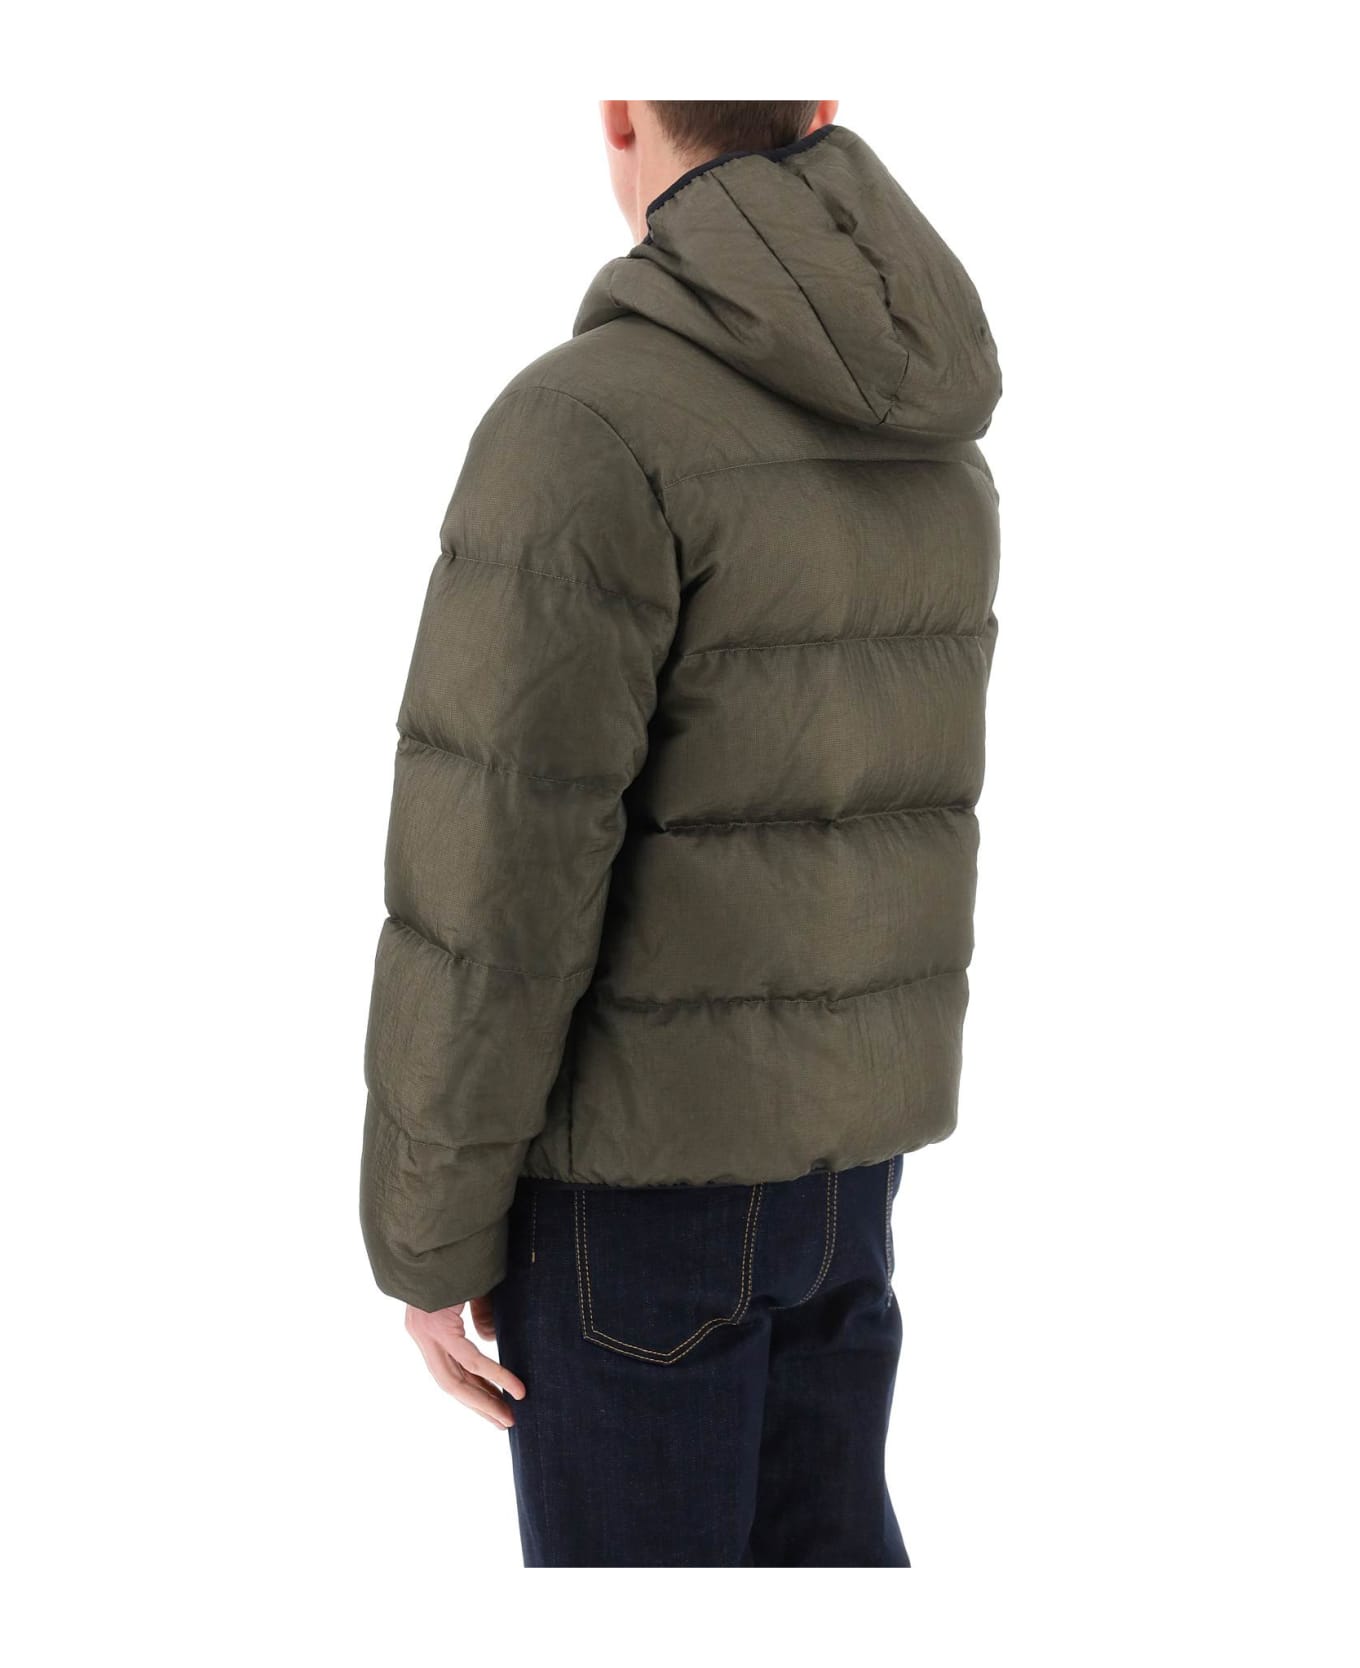 Dsquared2 Ripstop Puffer Jacket - MILITARY GREEN (Green)